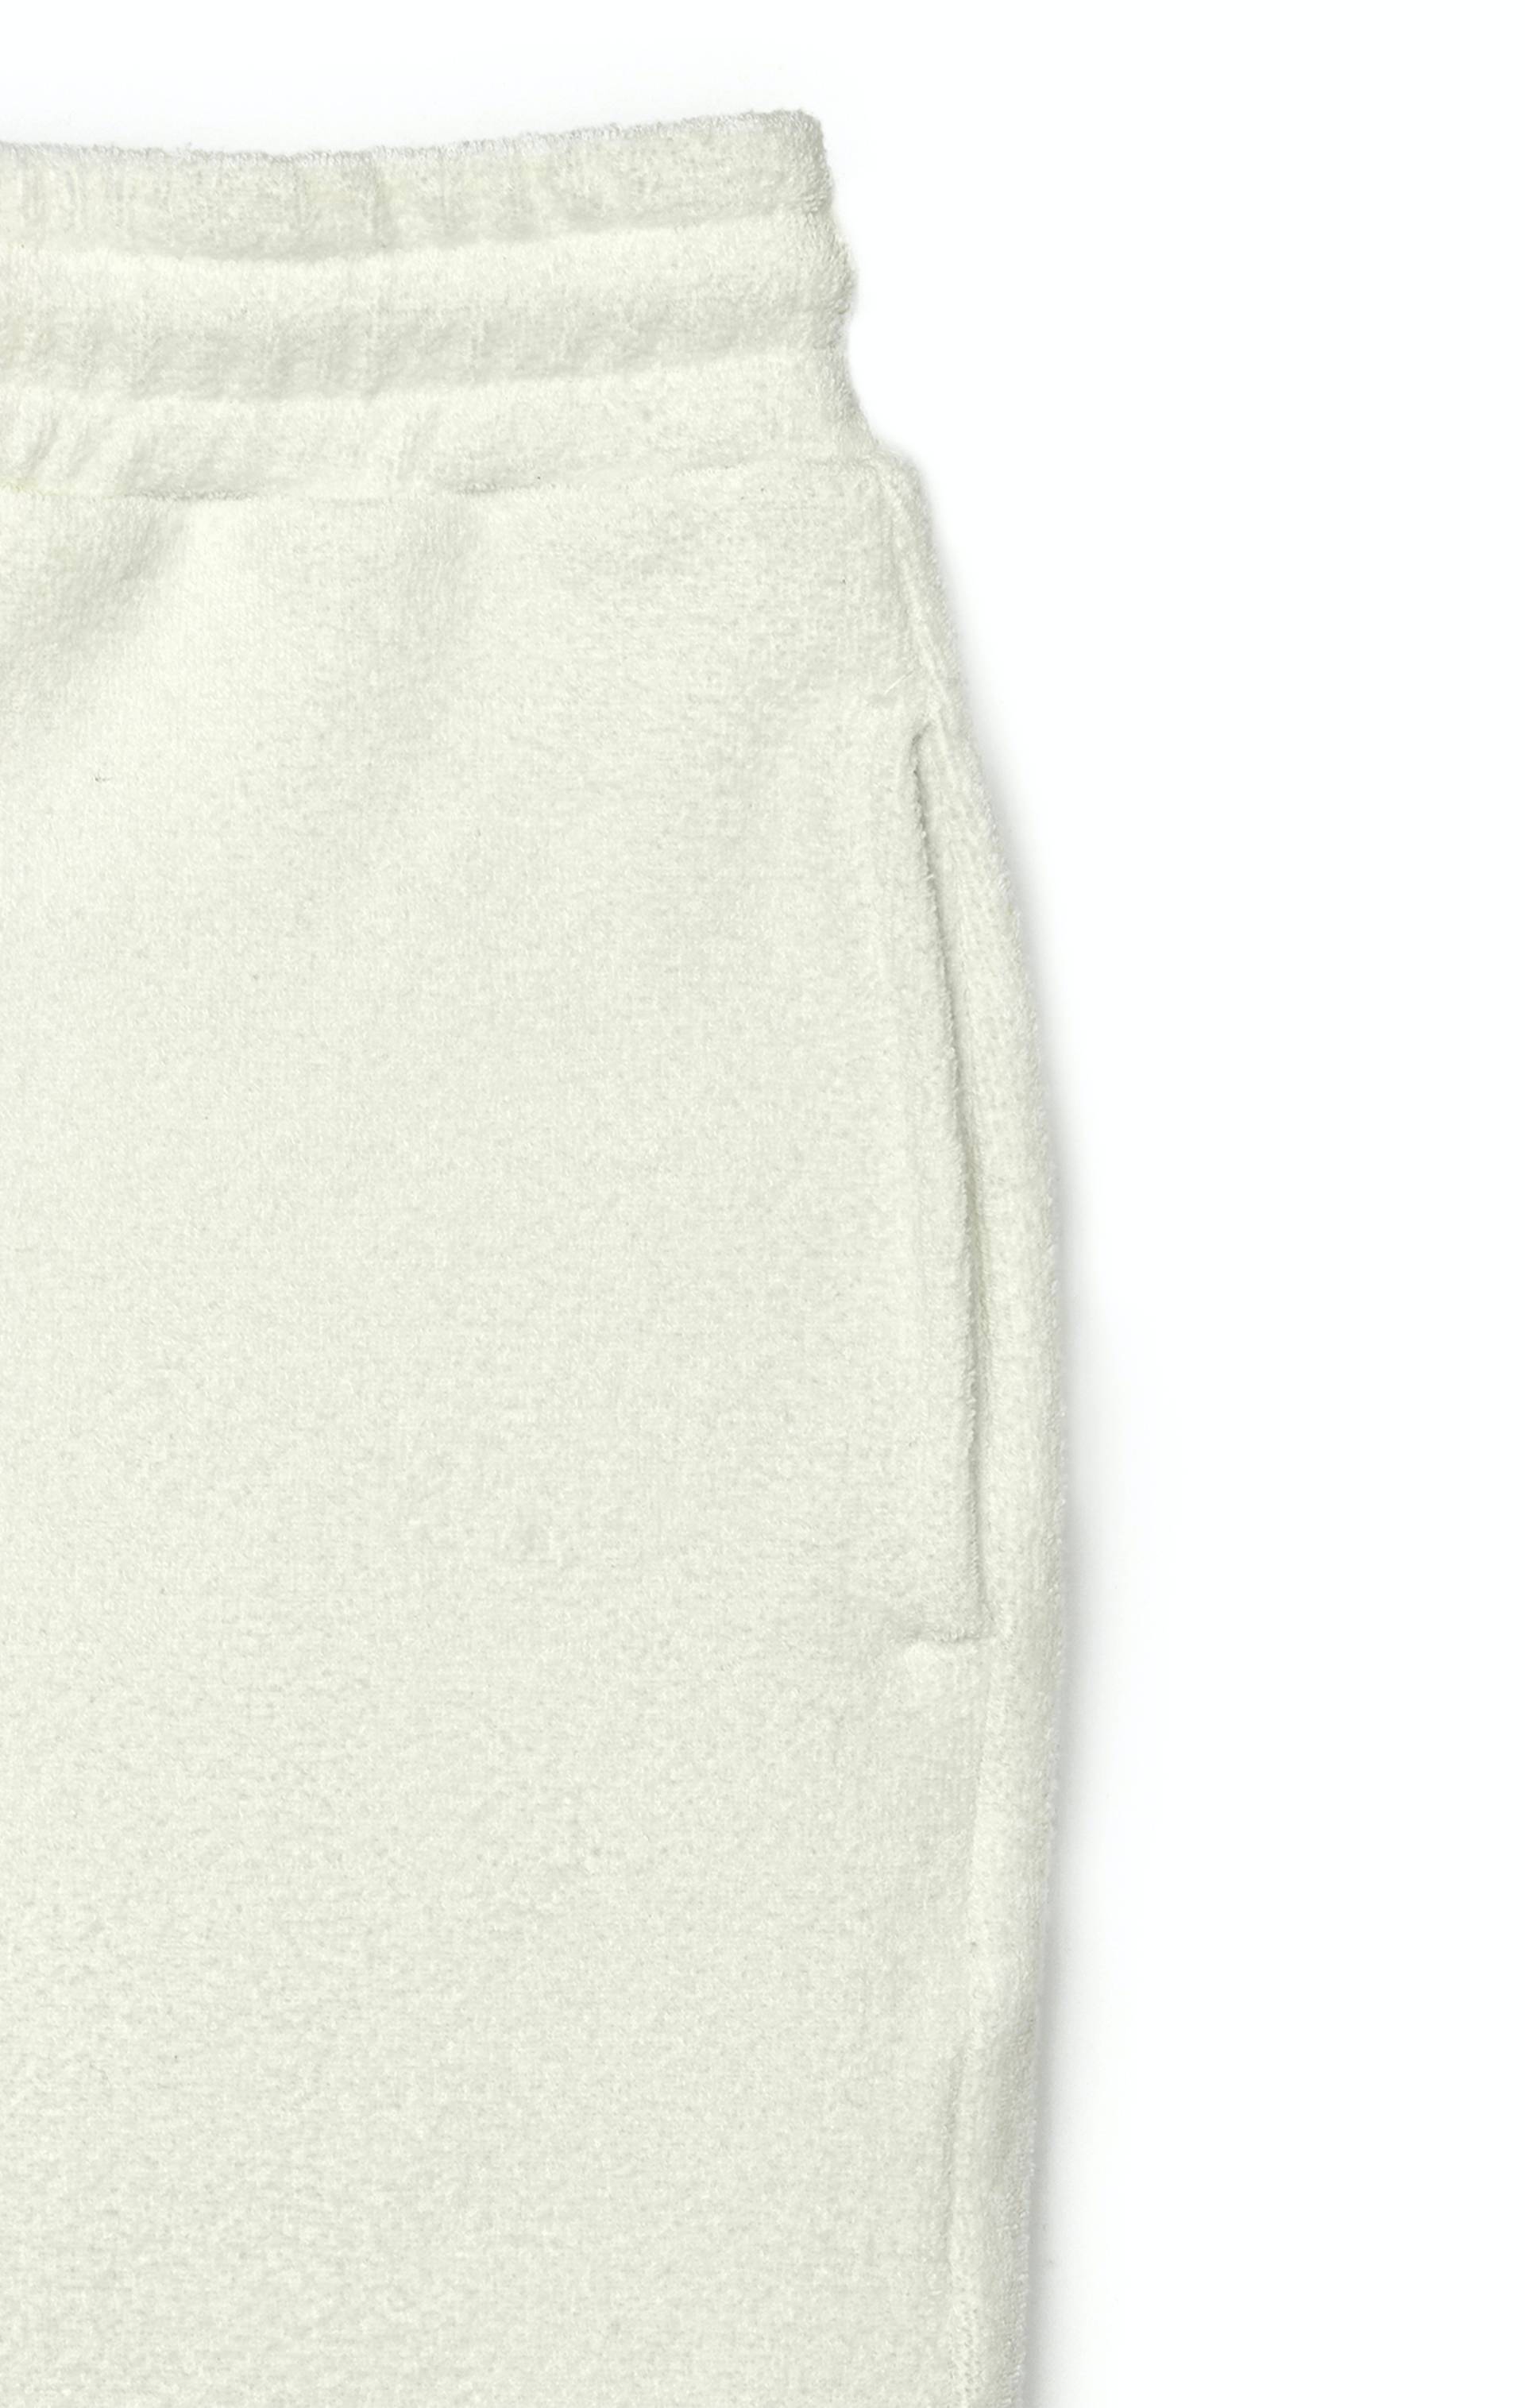 Onepiece Towel Club Shorts White - 2